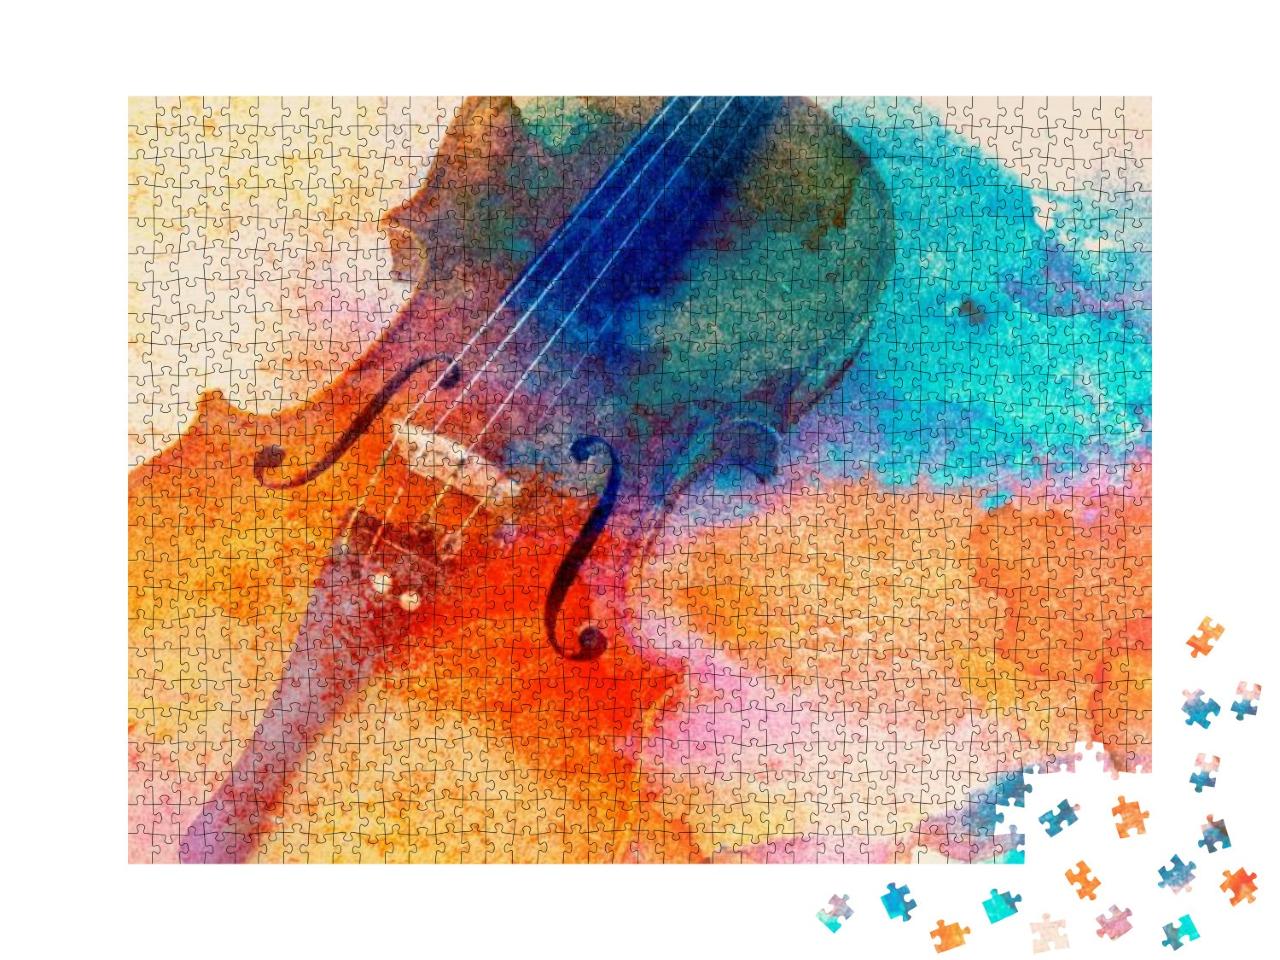 Abstract Violin Background - Violin Lying on the Table, M... Jigsaw Puzzle with 1000 pieces